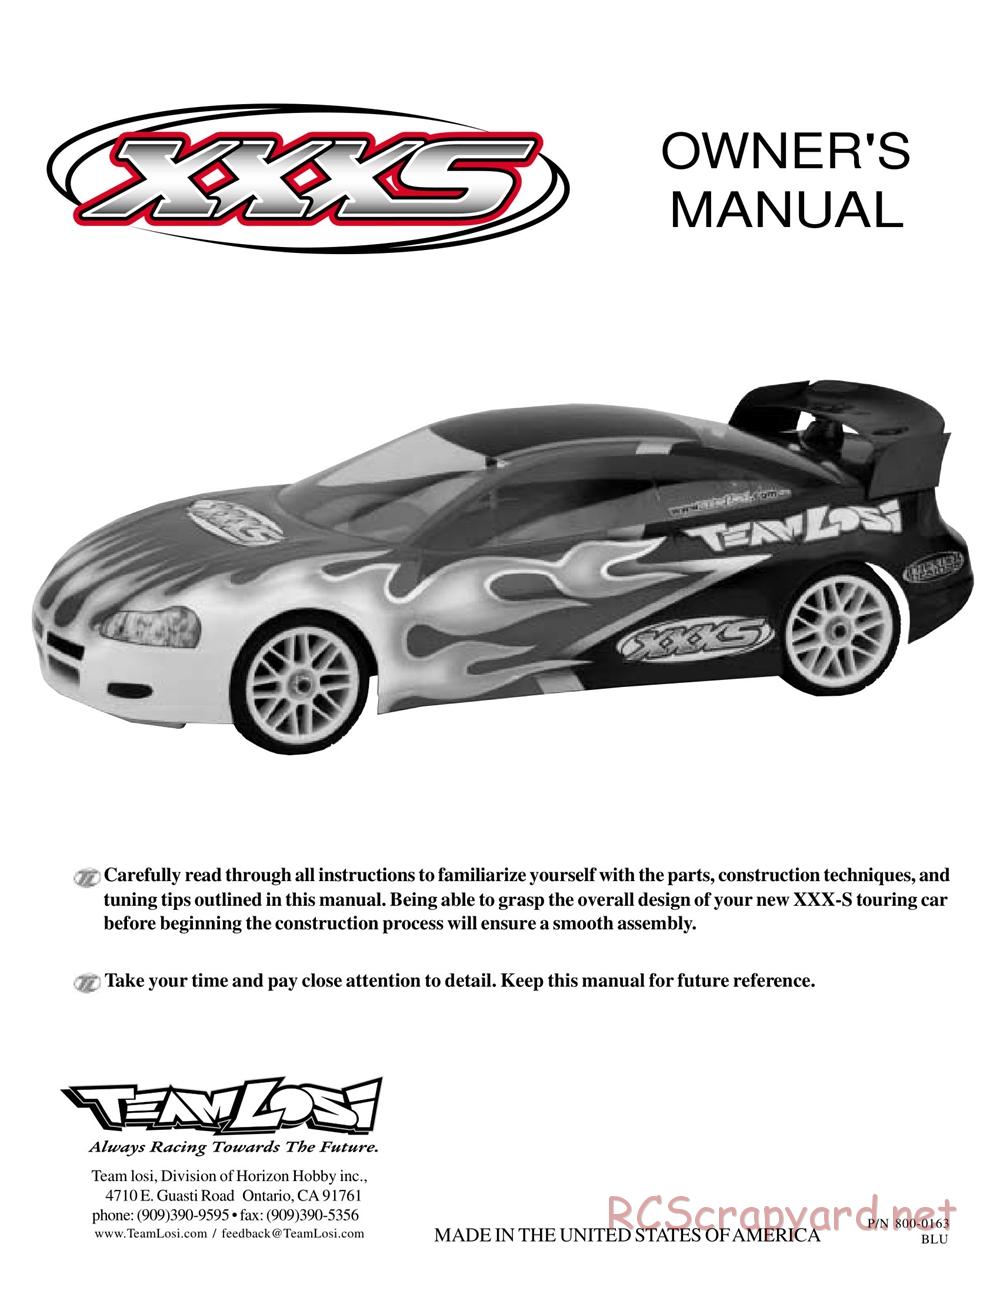 Team Losi - XXX-S - Manual - Page 1